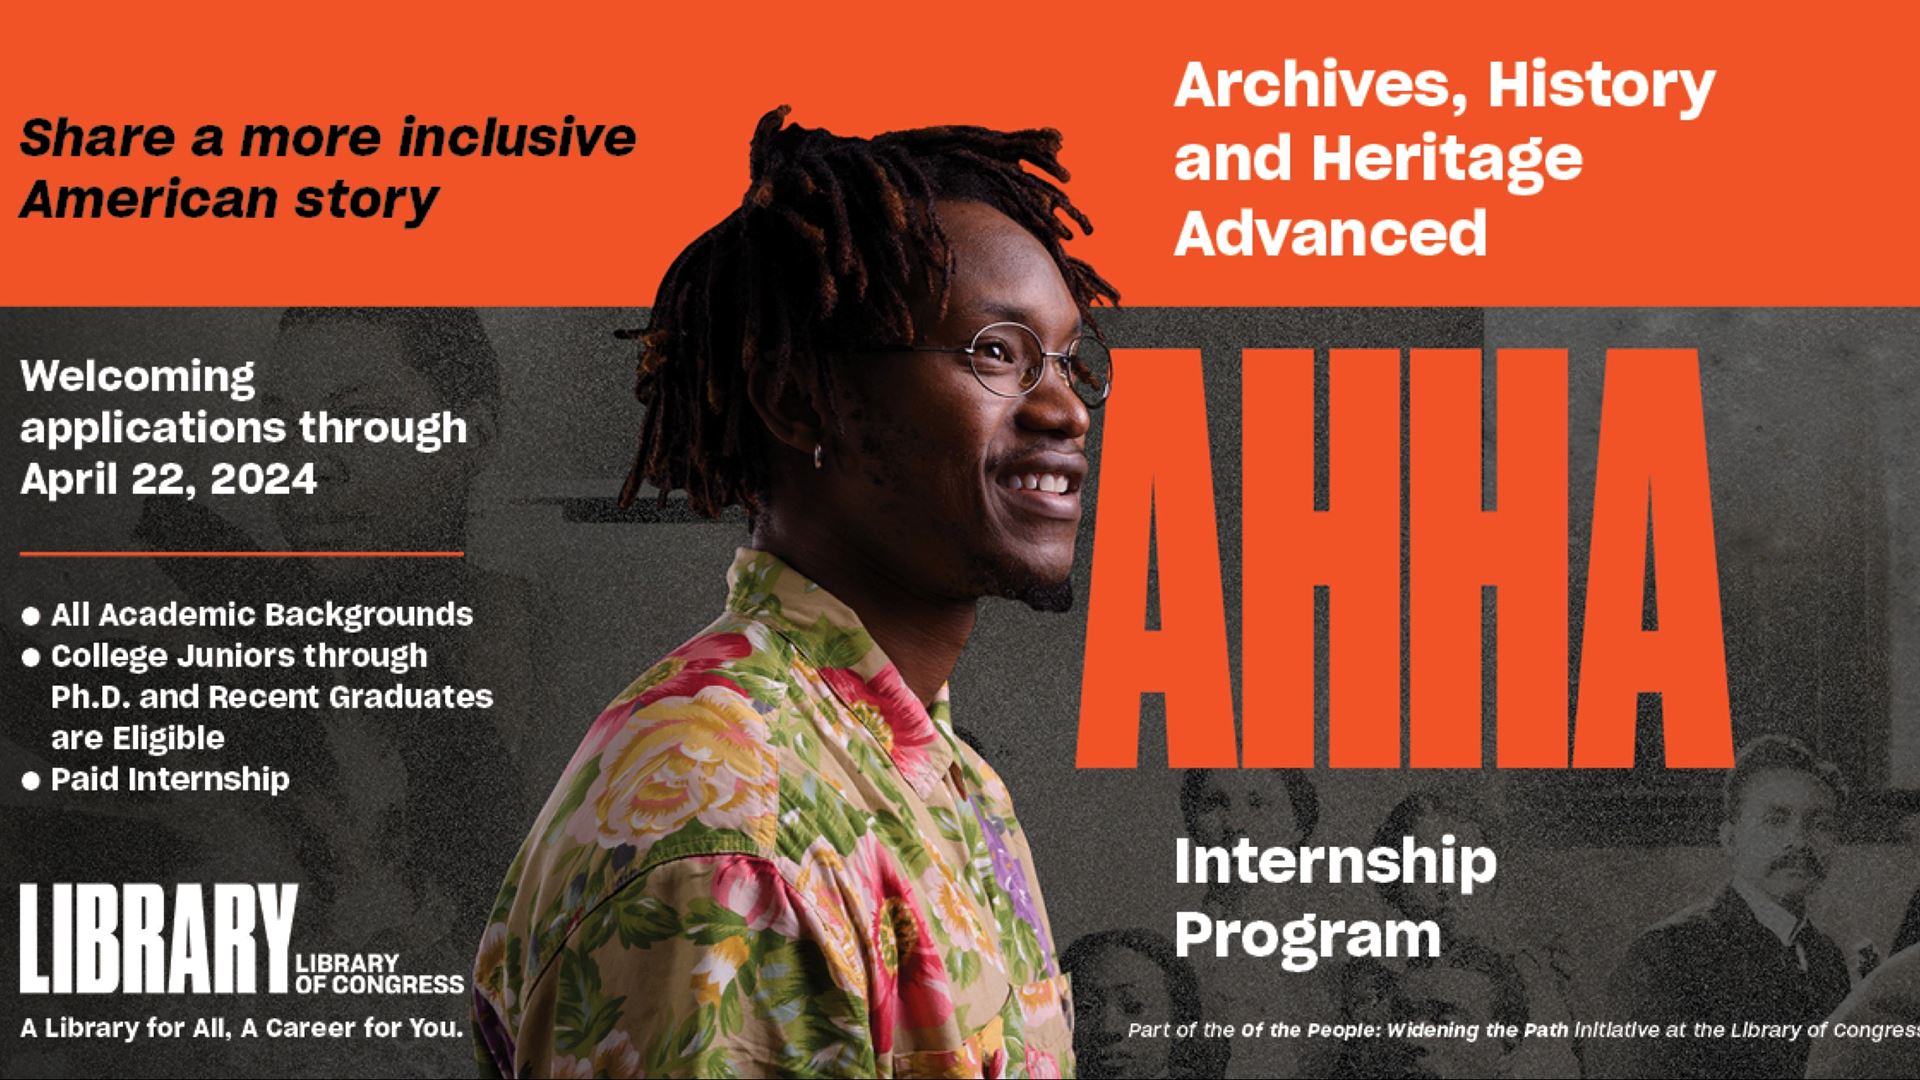 Library Seeks Applicants for the 2024 Archives History and Heritage Advanced Internship Program